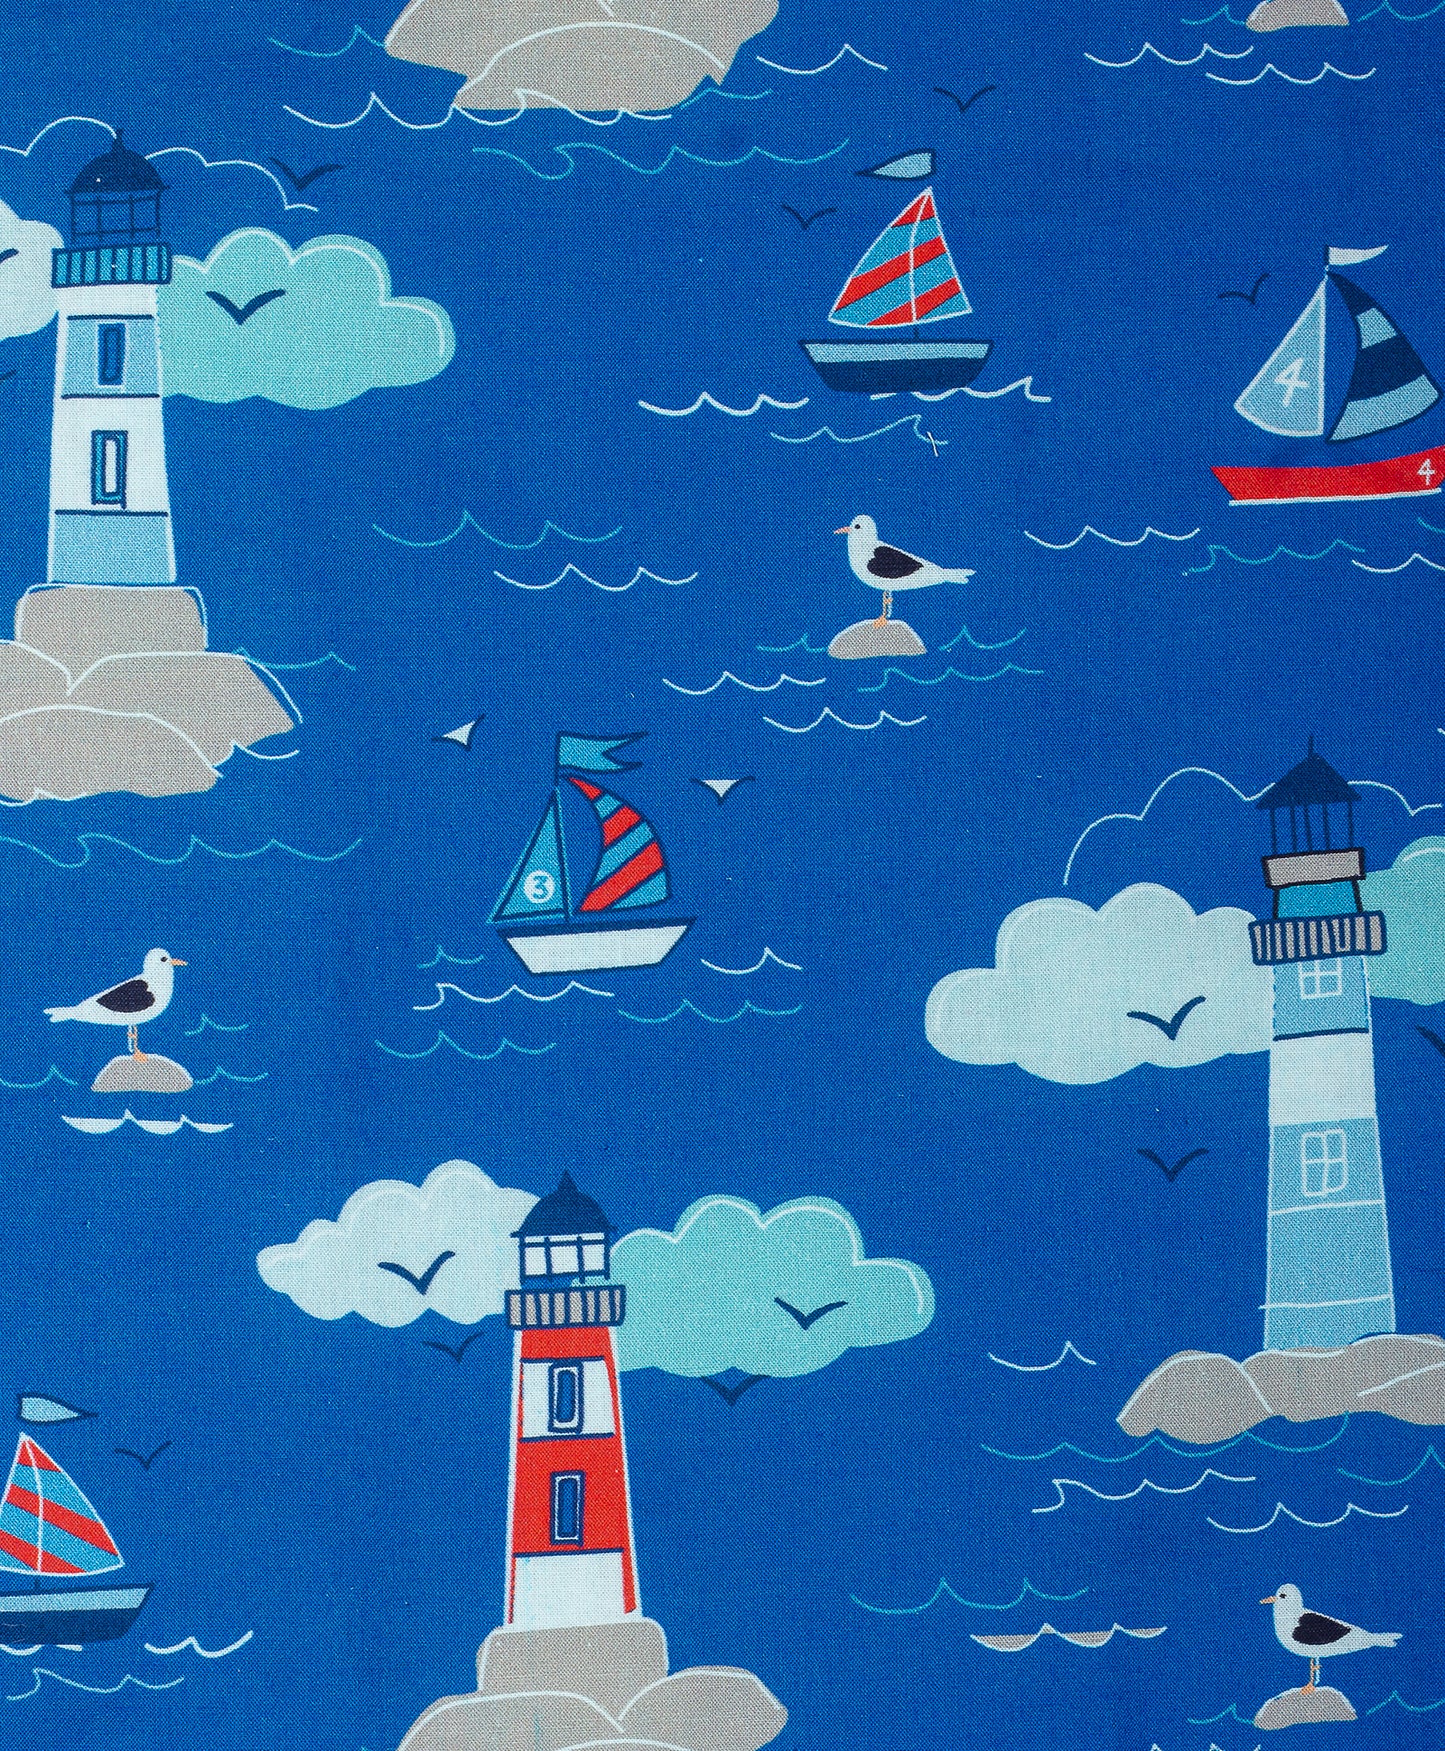 SHIP AND LIGHTHOUSE PRINT AC QUILT